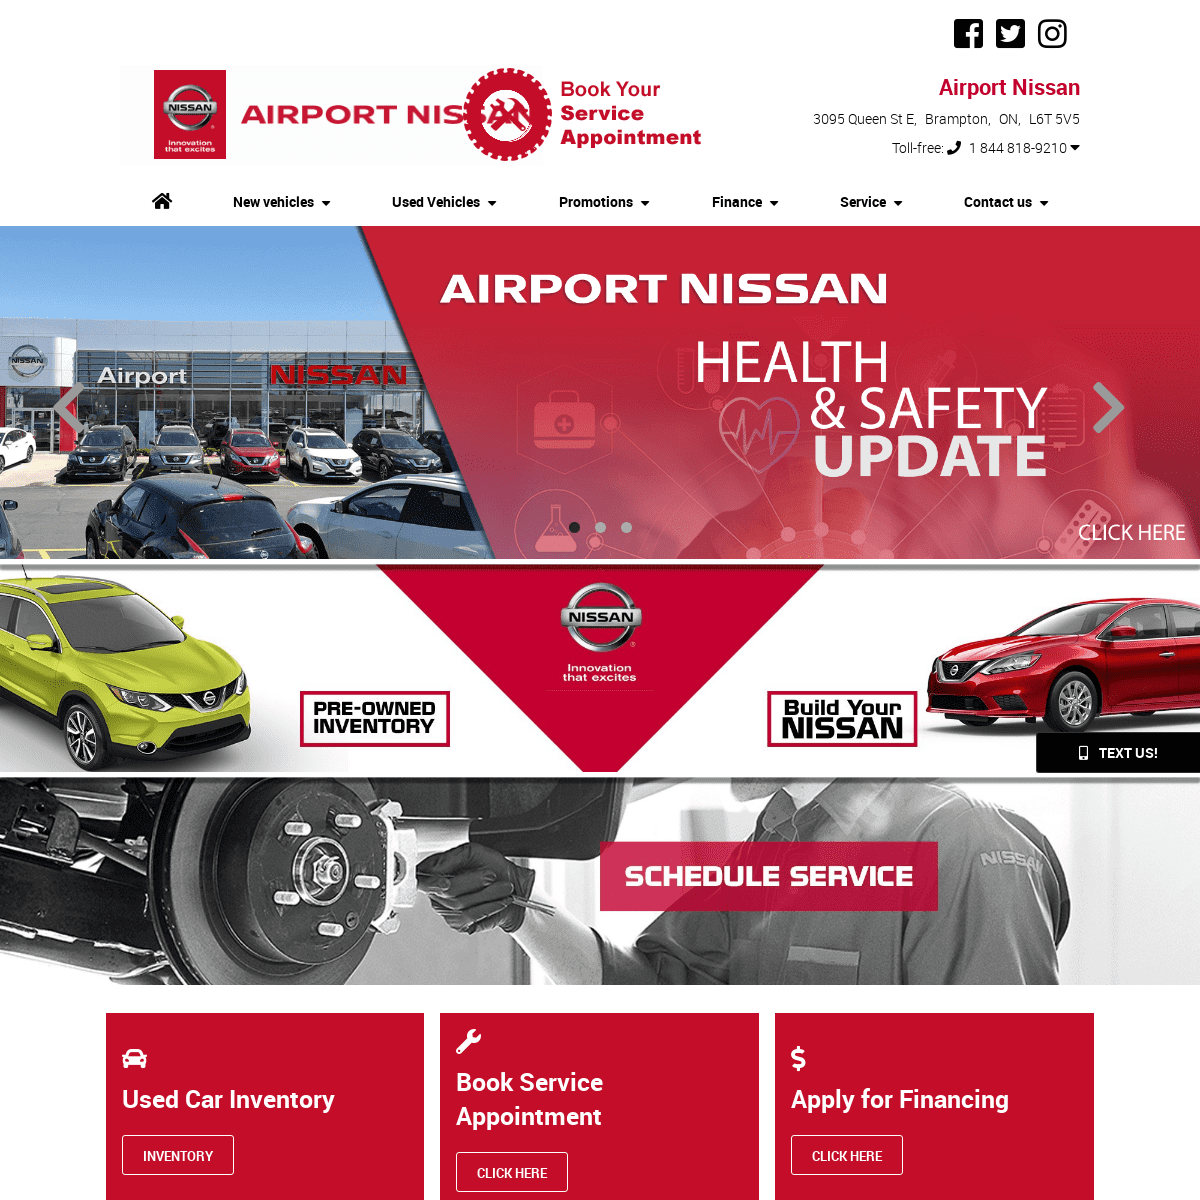 A complete backup of airportnissan.com